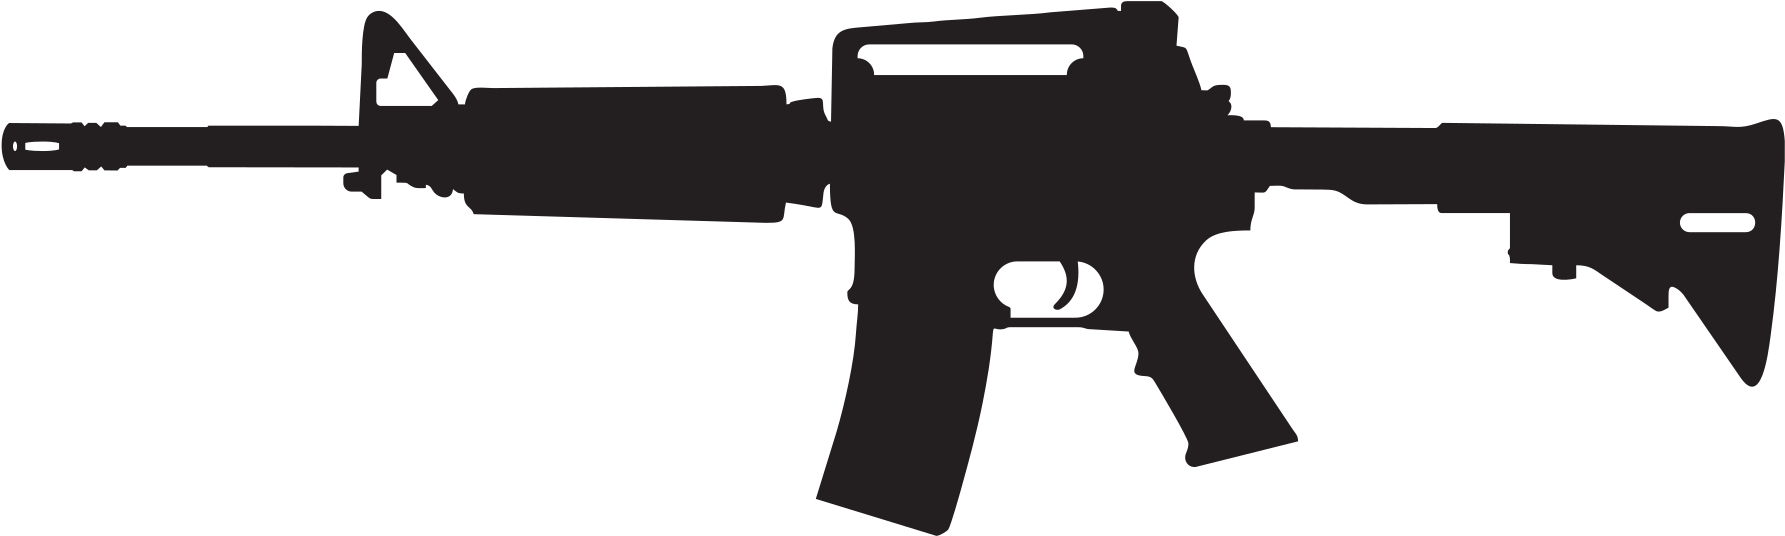 Revolver Silhouette Png - M4 G&g Full Metal (2000x857), Png Download